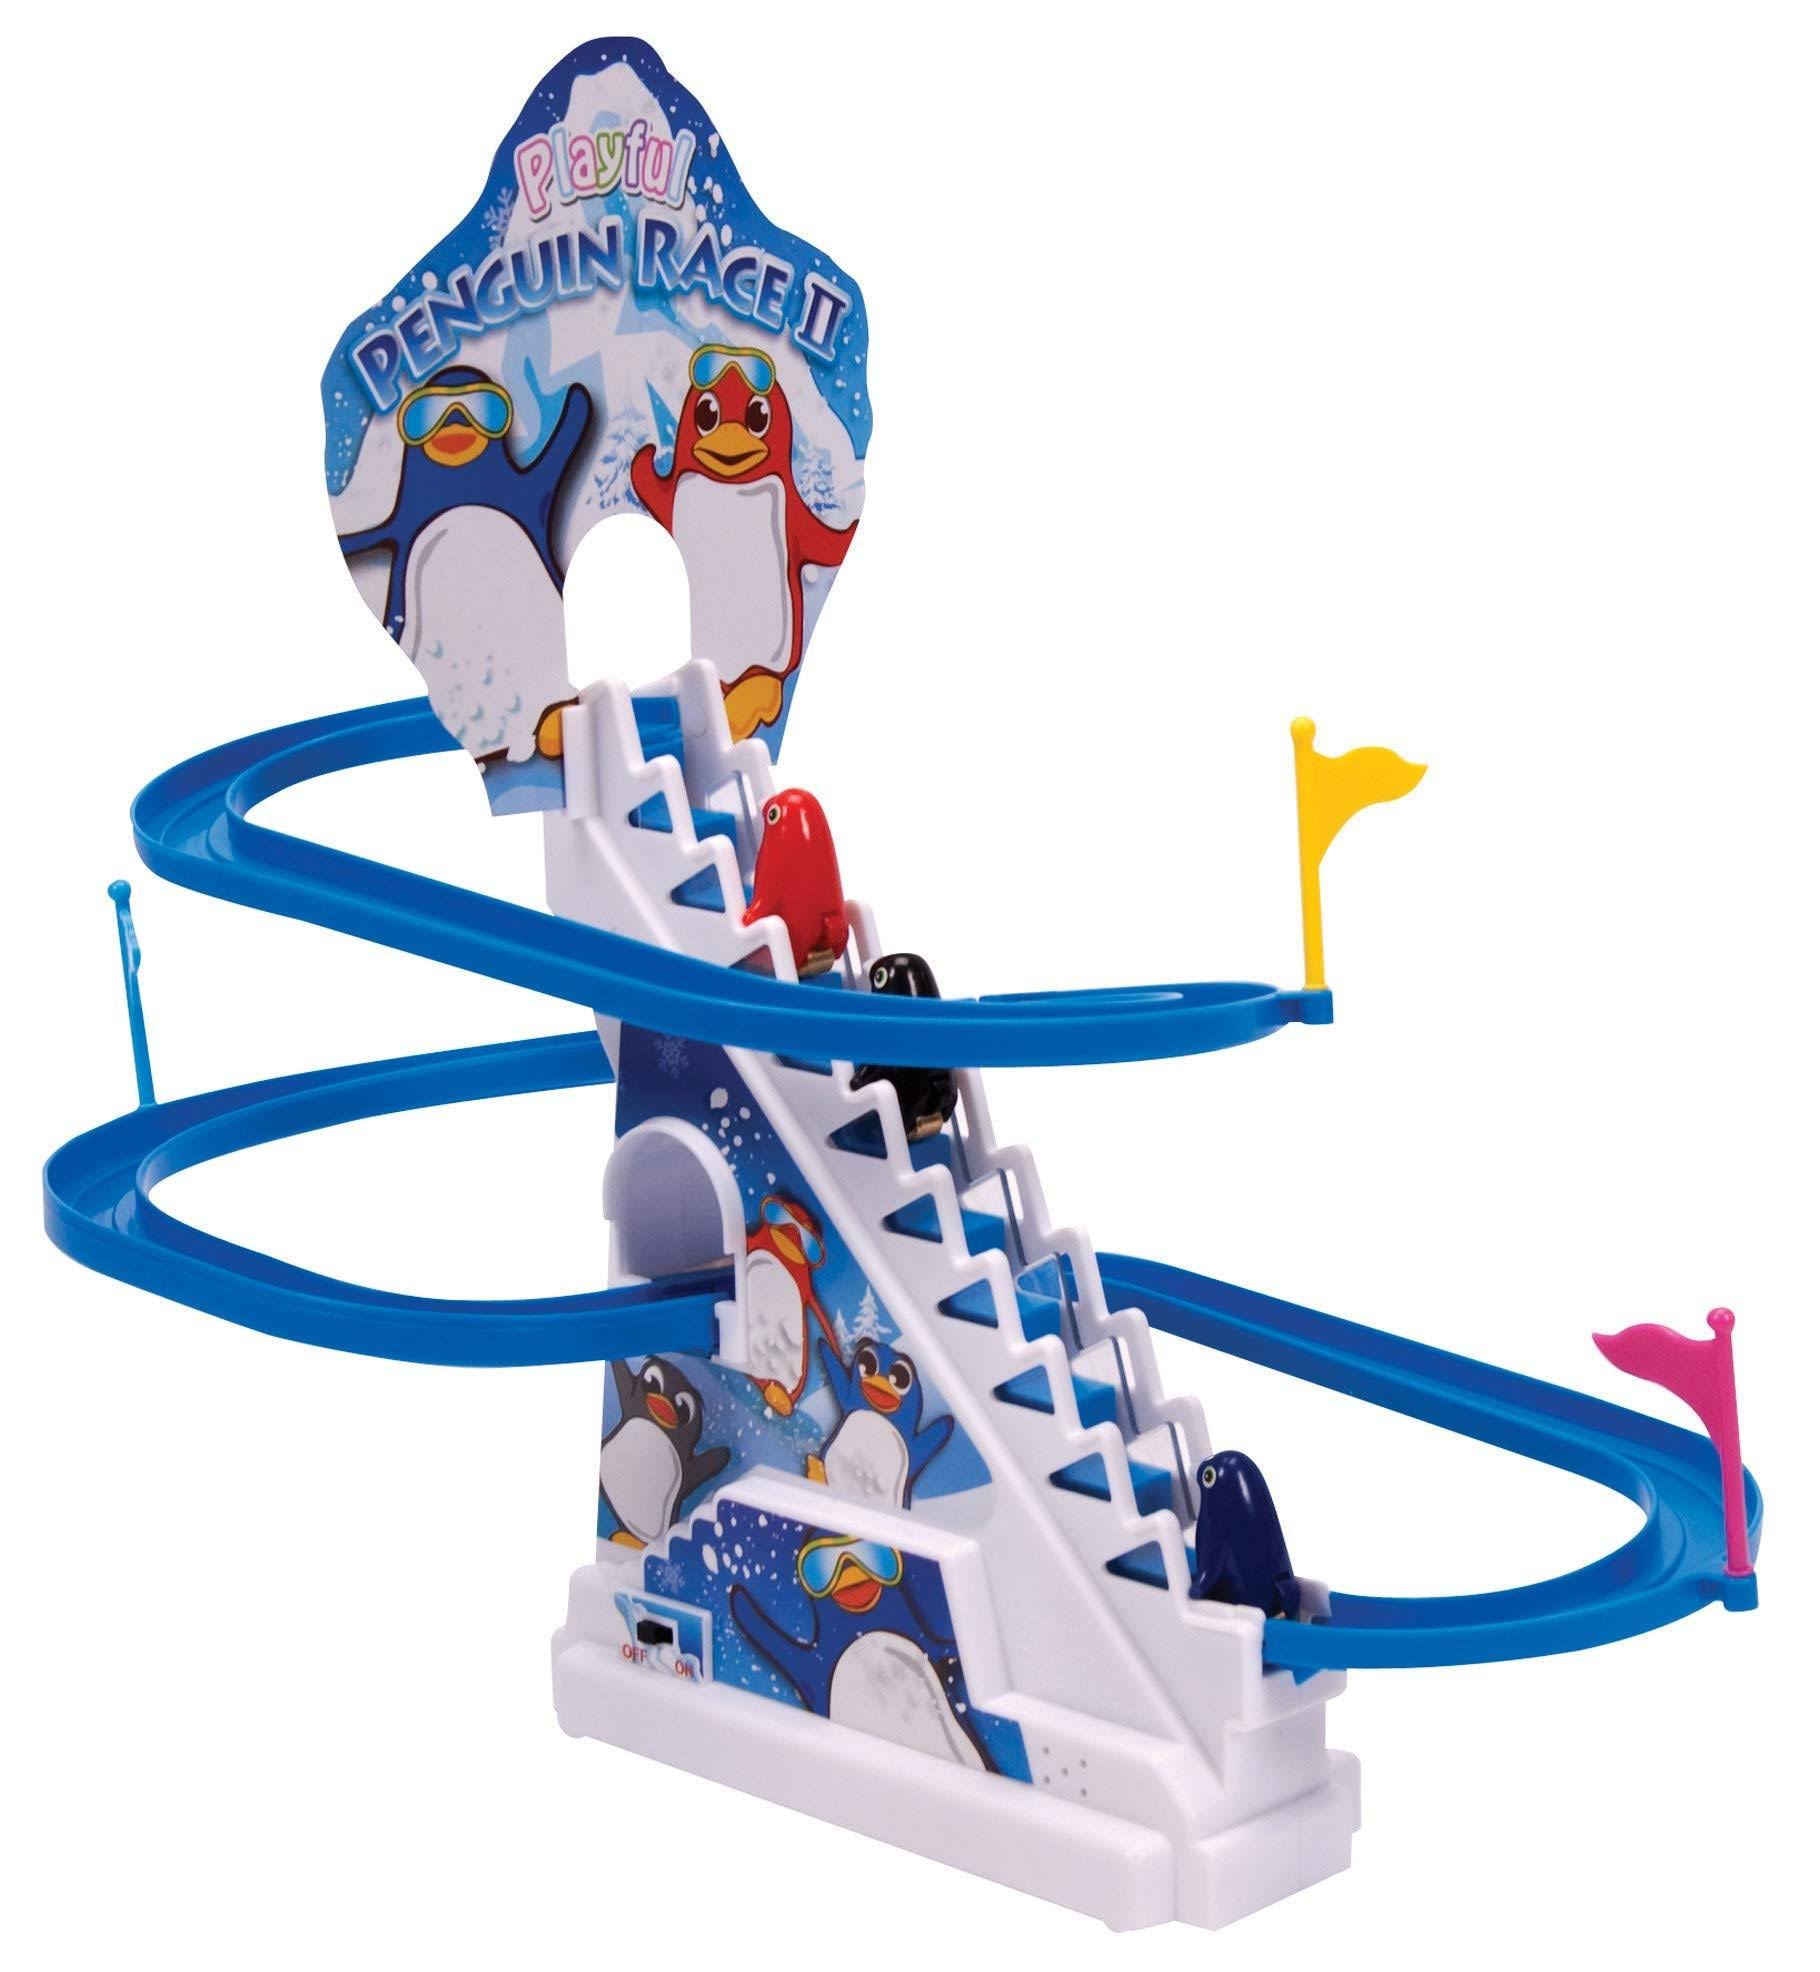 Schylling Penguin Race Game